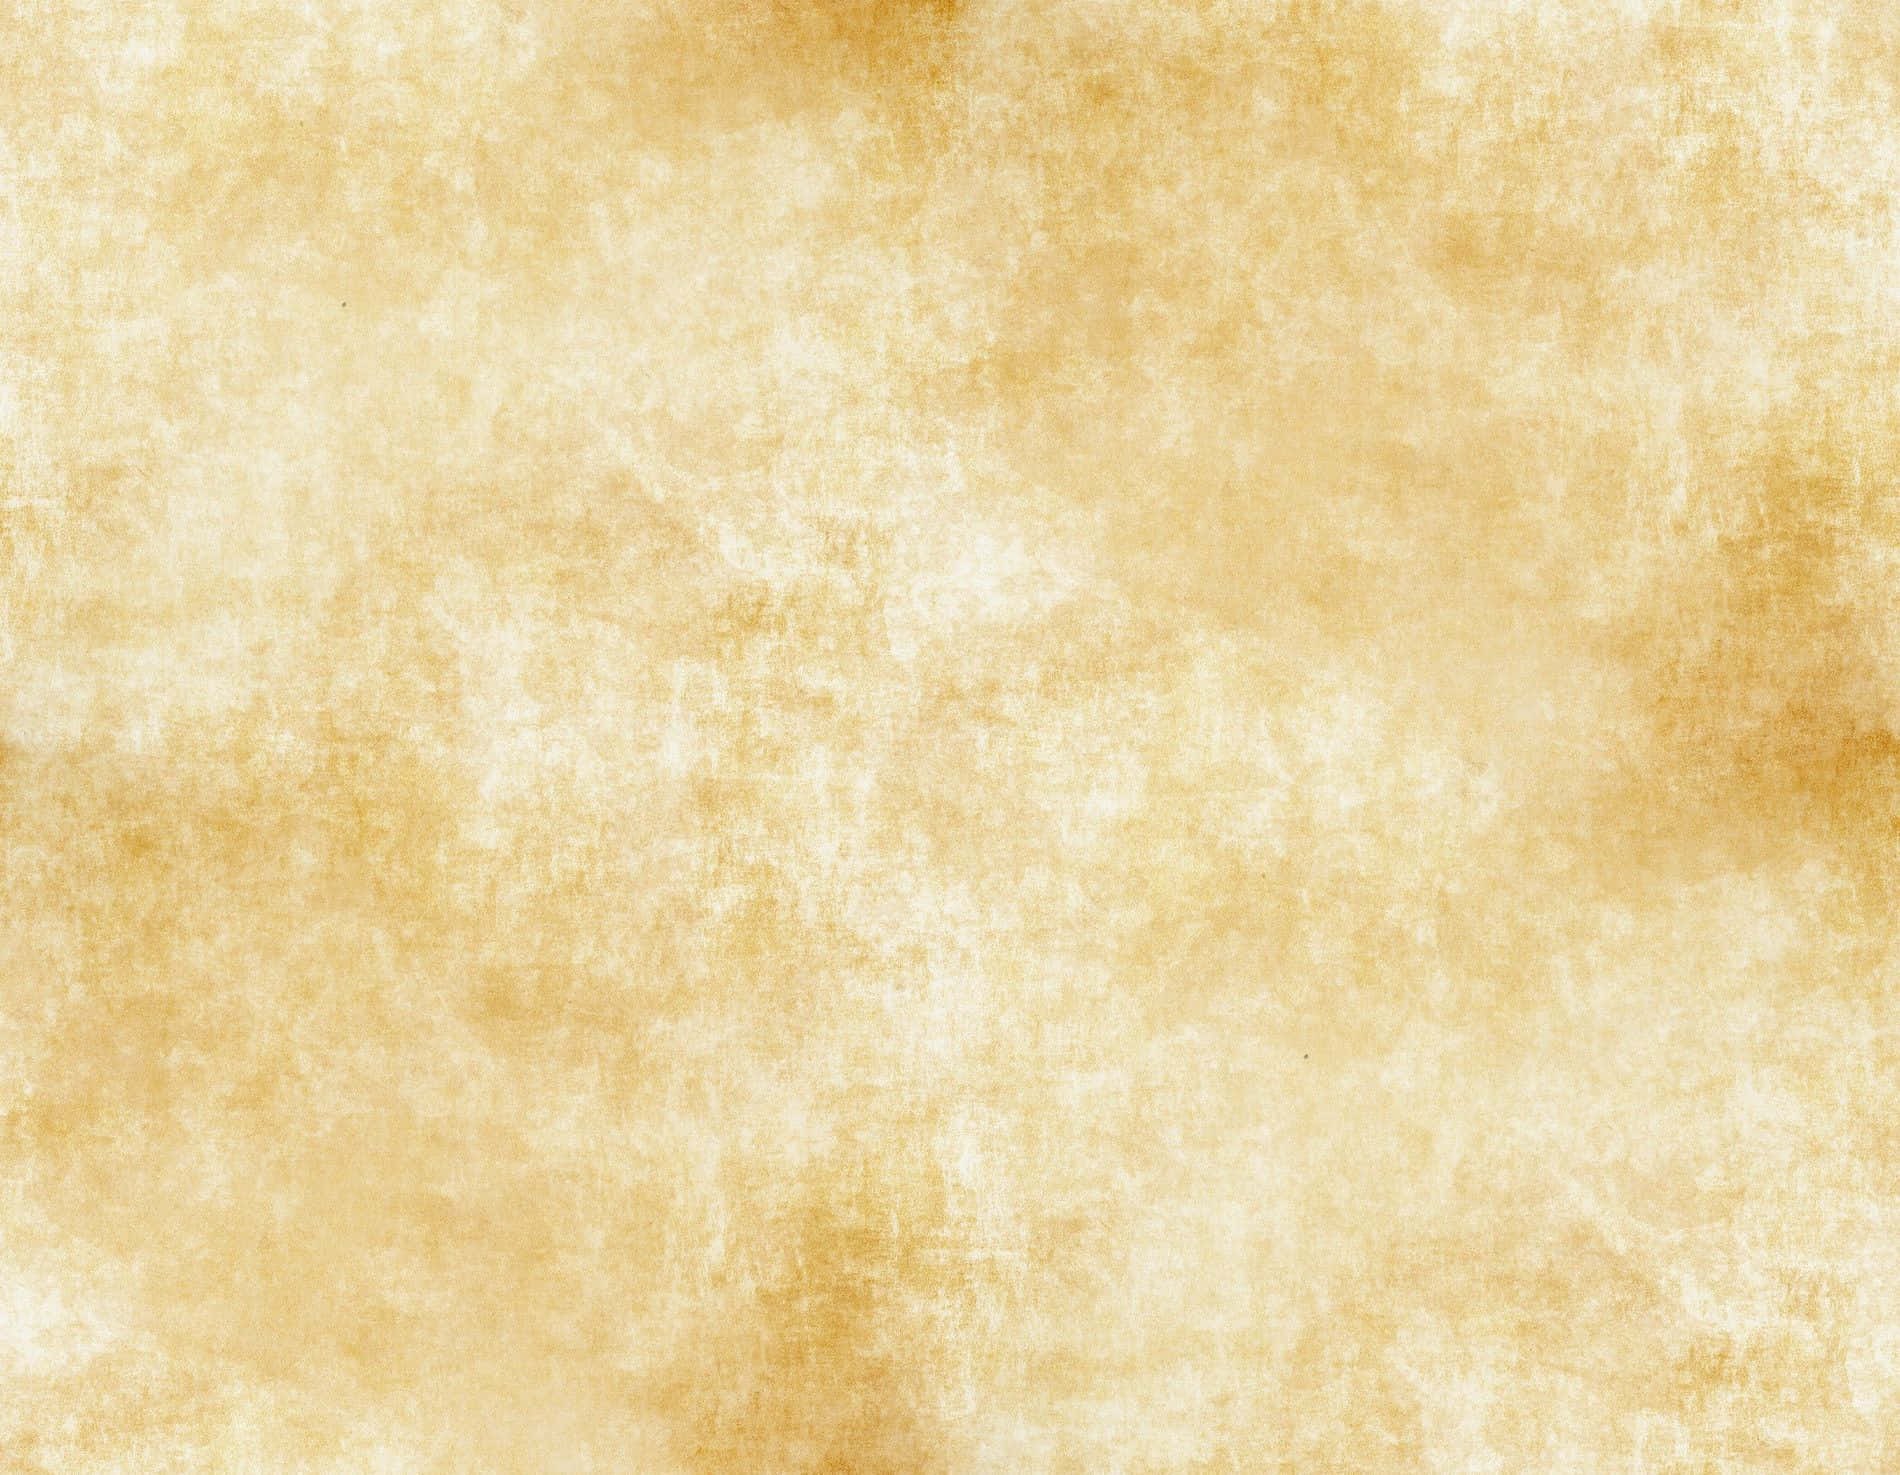 Beige And White Old Paper Texture Picture